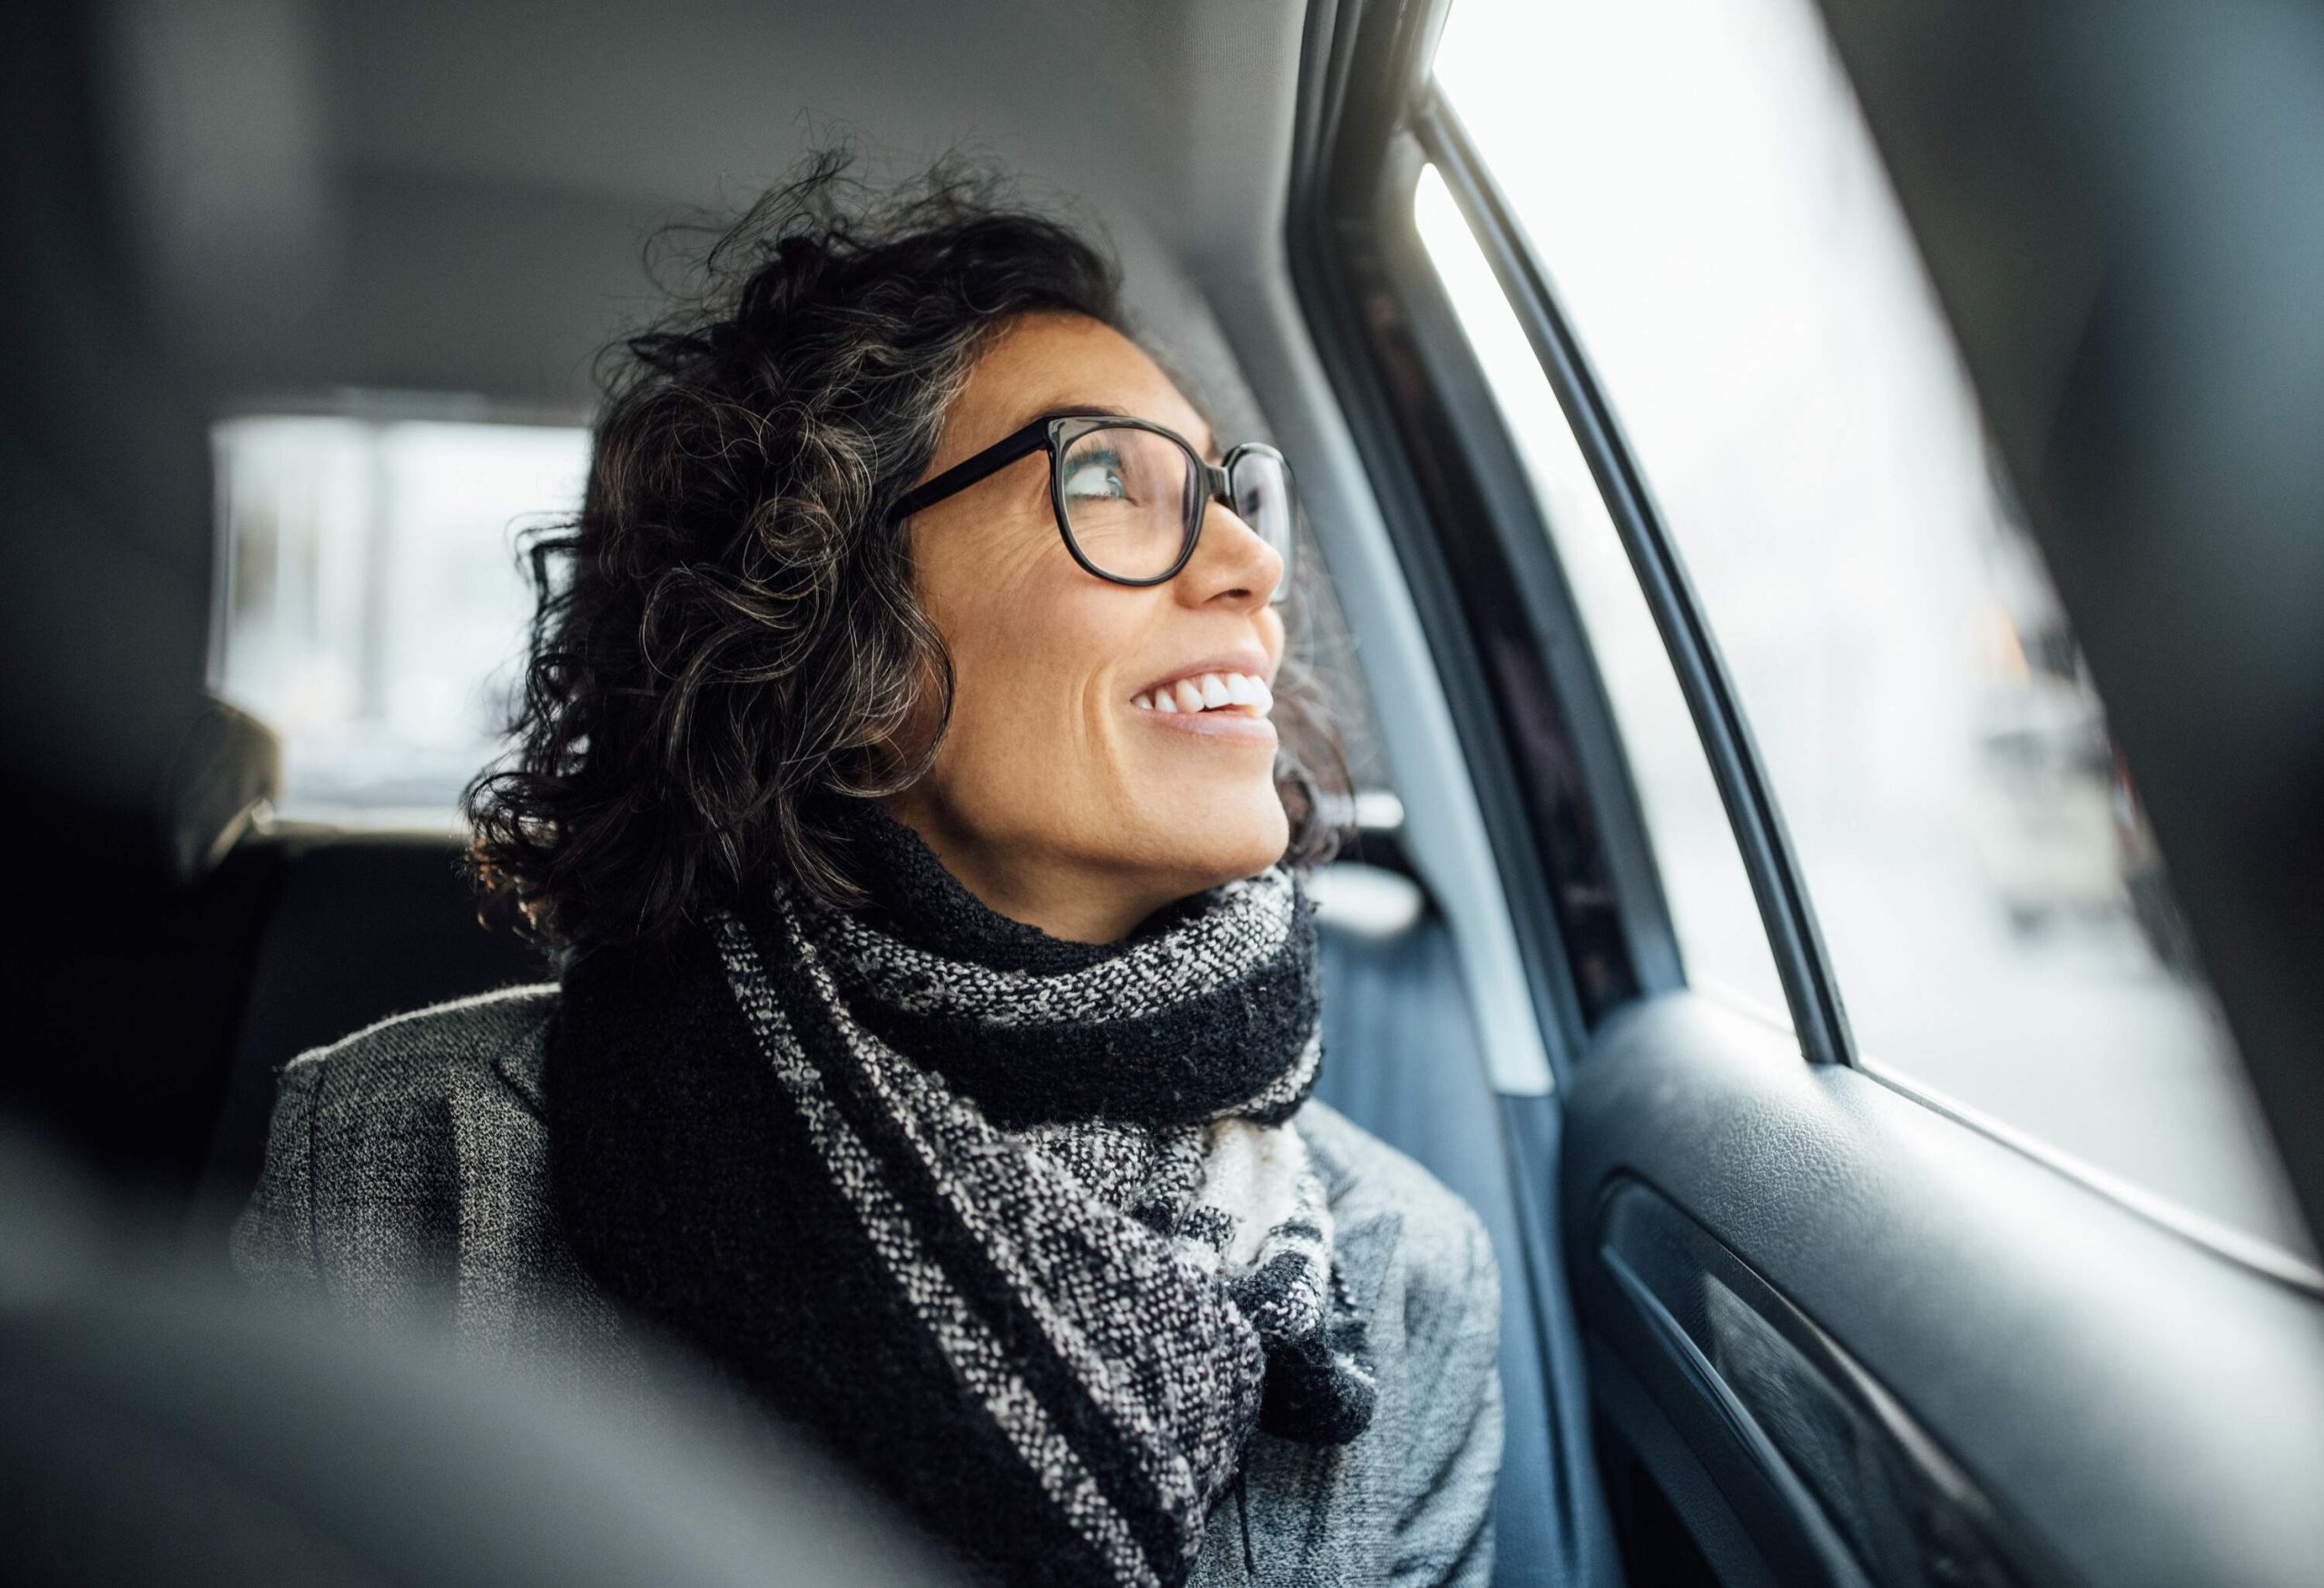 dest_germany_berlin_car_backseat_person_female_smiling_looking_out_window_gettyimages-1129377235